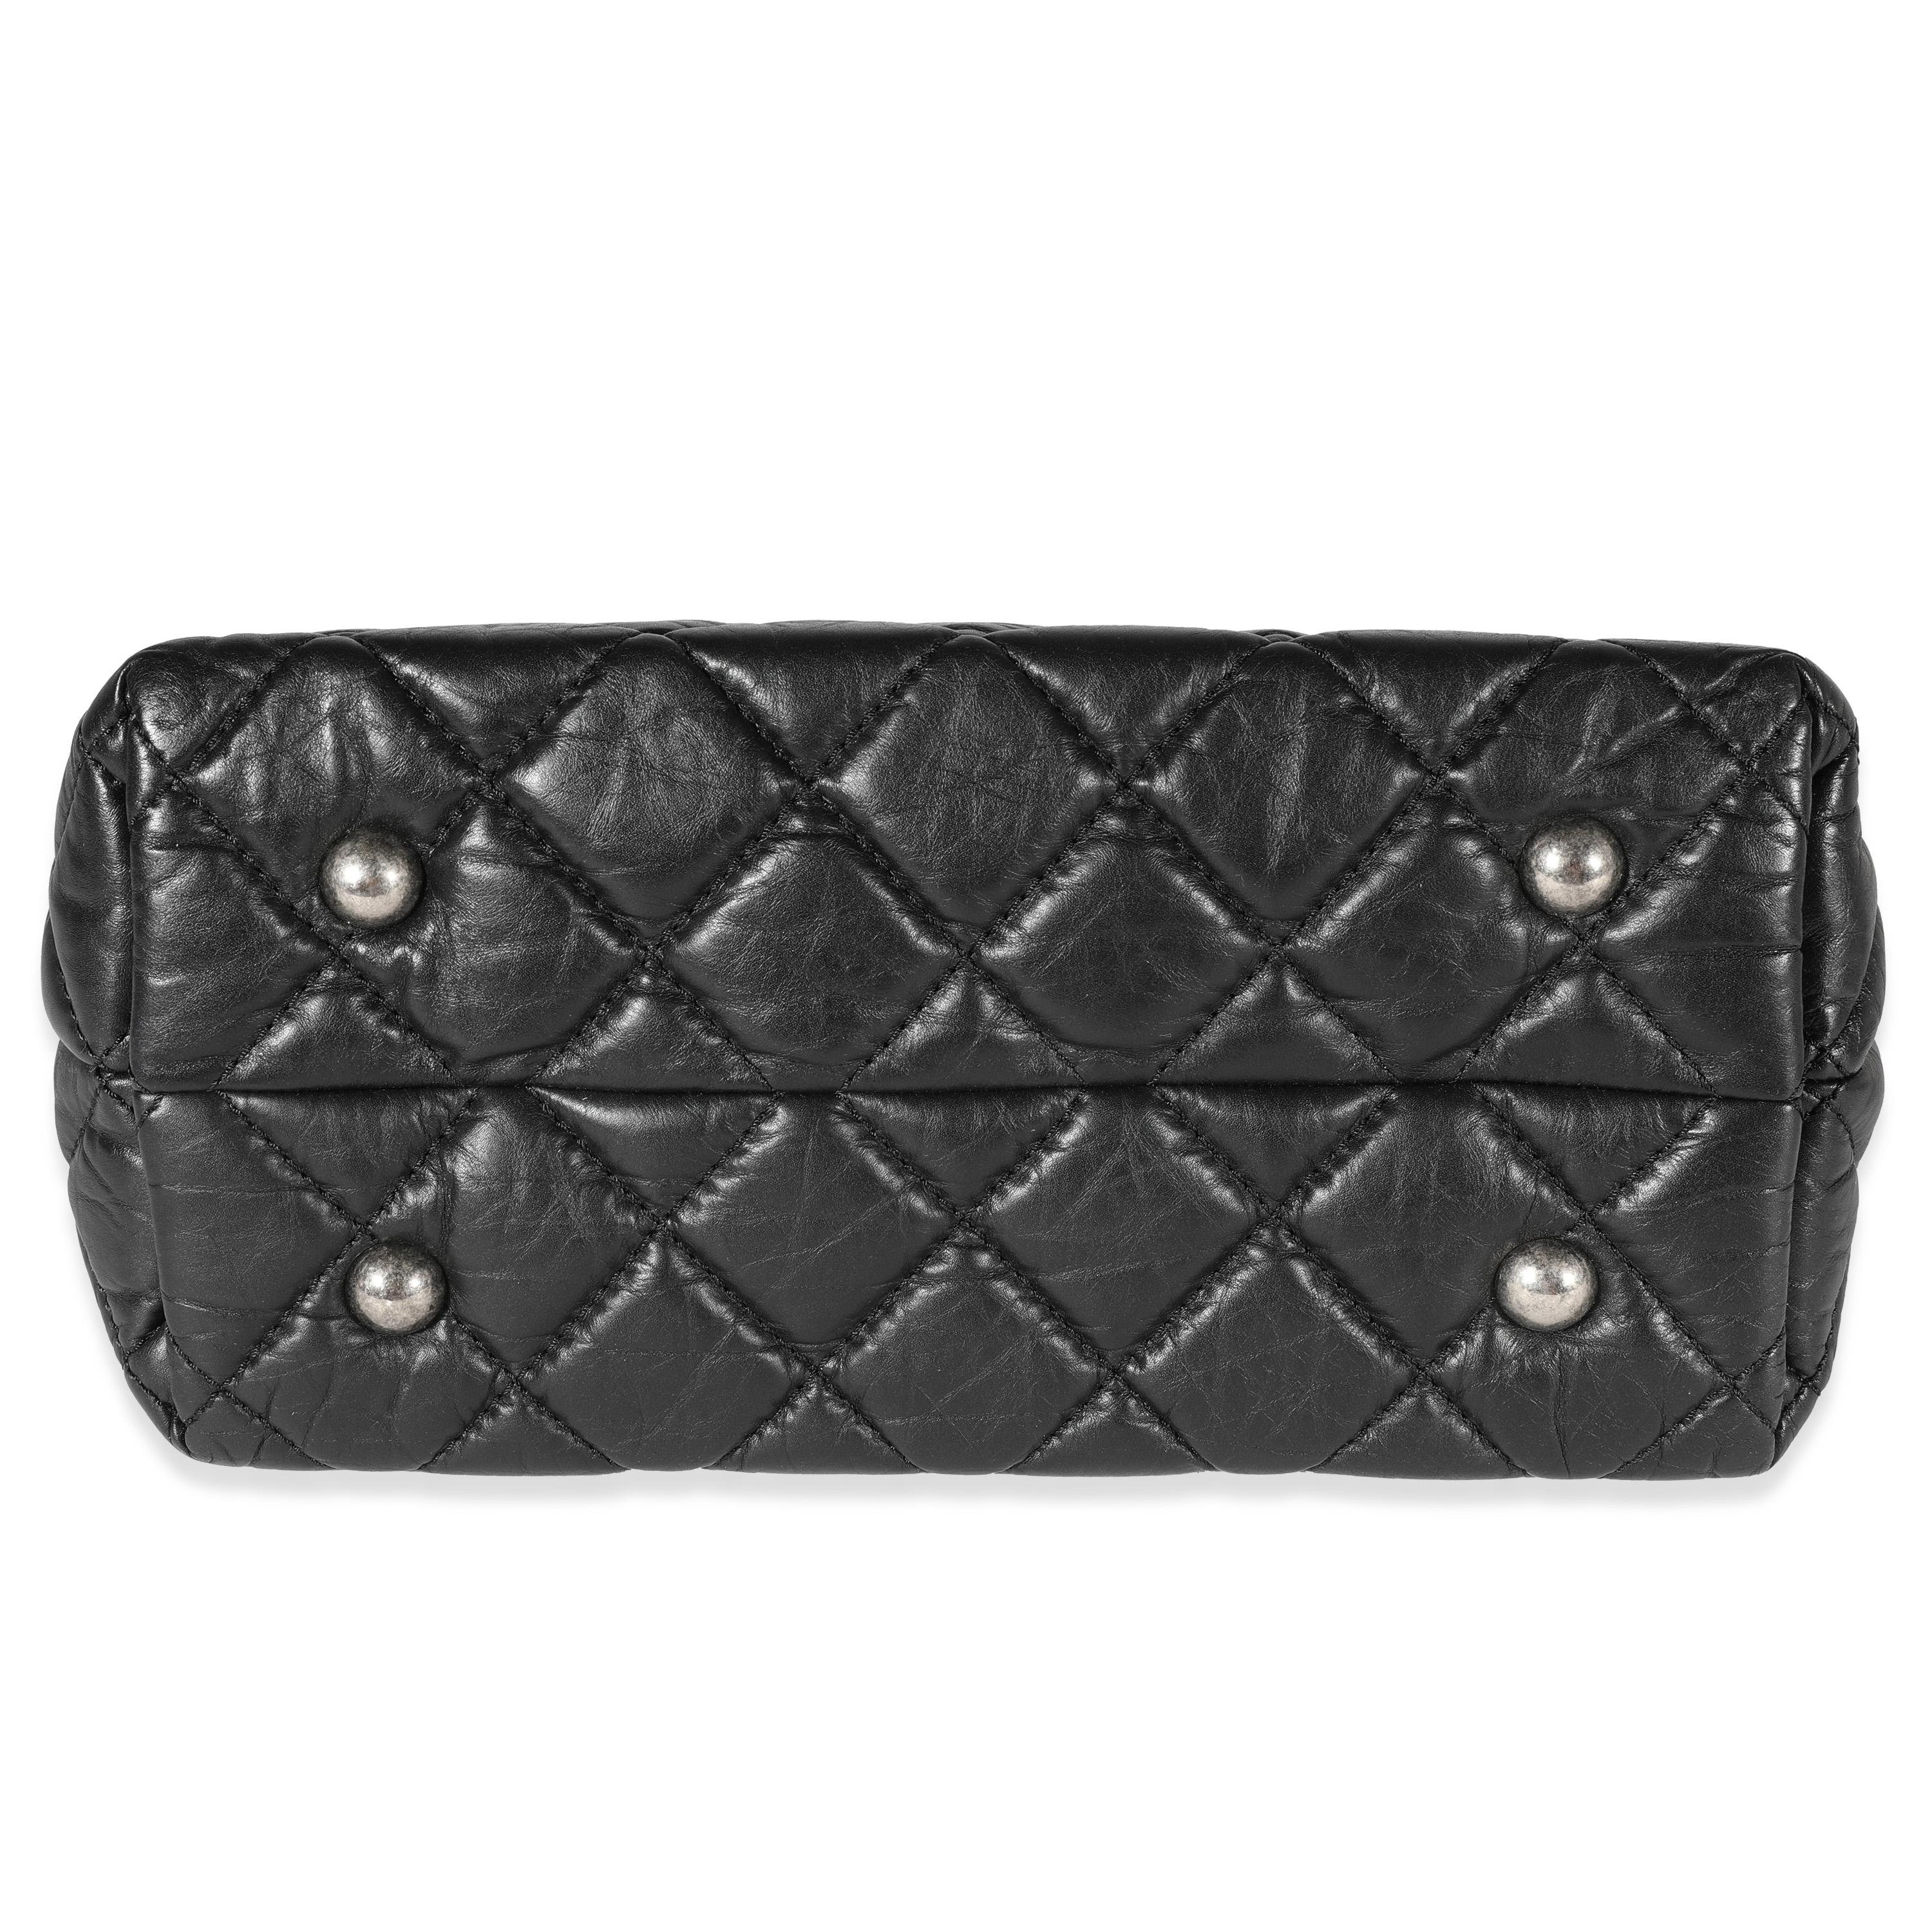 Chanel Black Quilted Aged Calfskin Reissue Shopping Tote For Sale 3